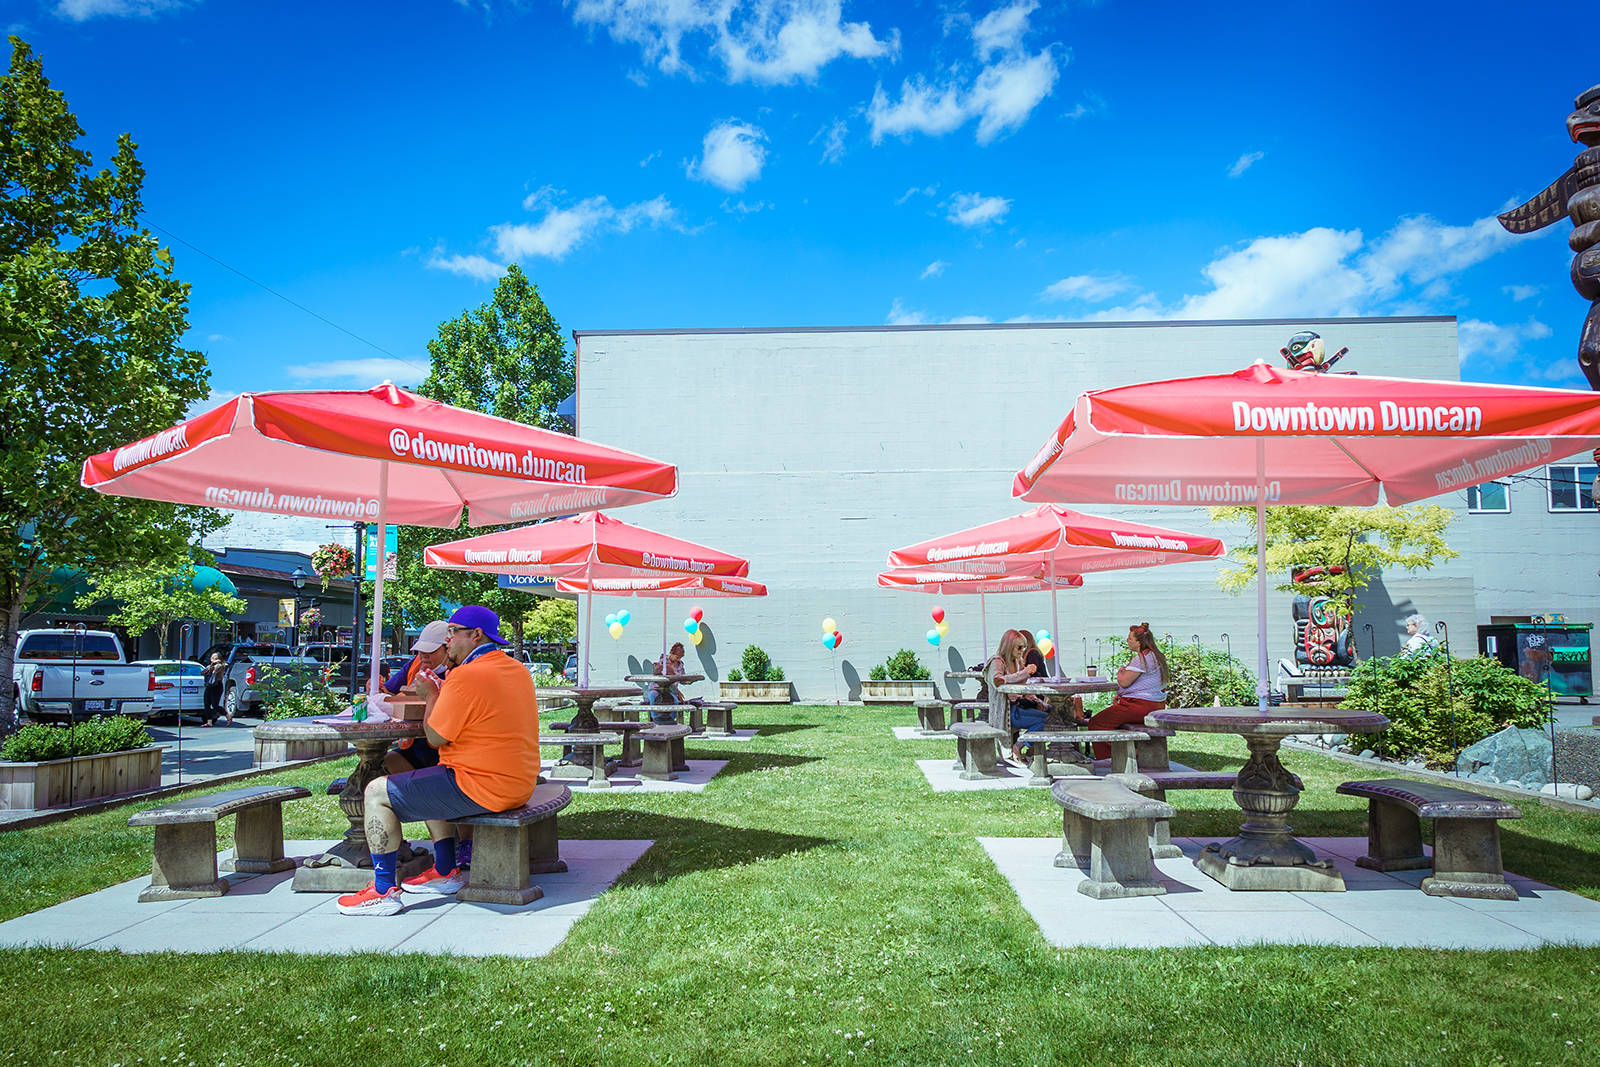 Six round concrete tables with benches and red umbrellas welcome guests in the park at 85 Station St., the perfect place to enjoy takeout from area restaurants and soak in the ambiance of downtown Duncan this summer. Two of the tables are designed to be wheelchair accessible. Photo by Keyworks Design